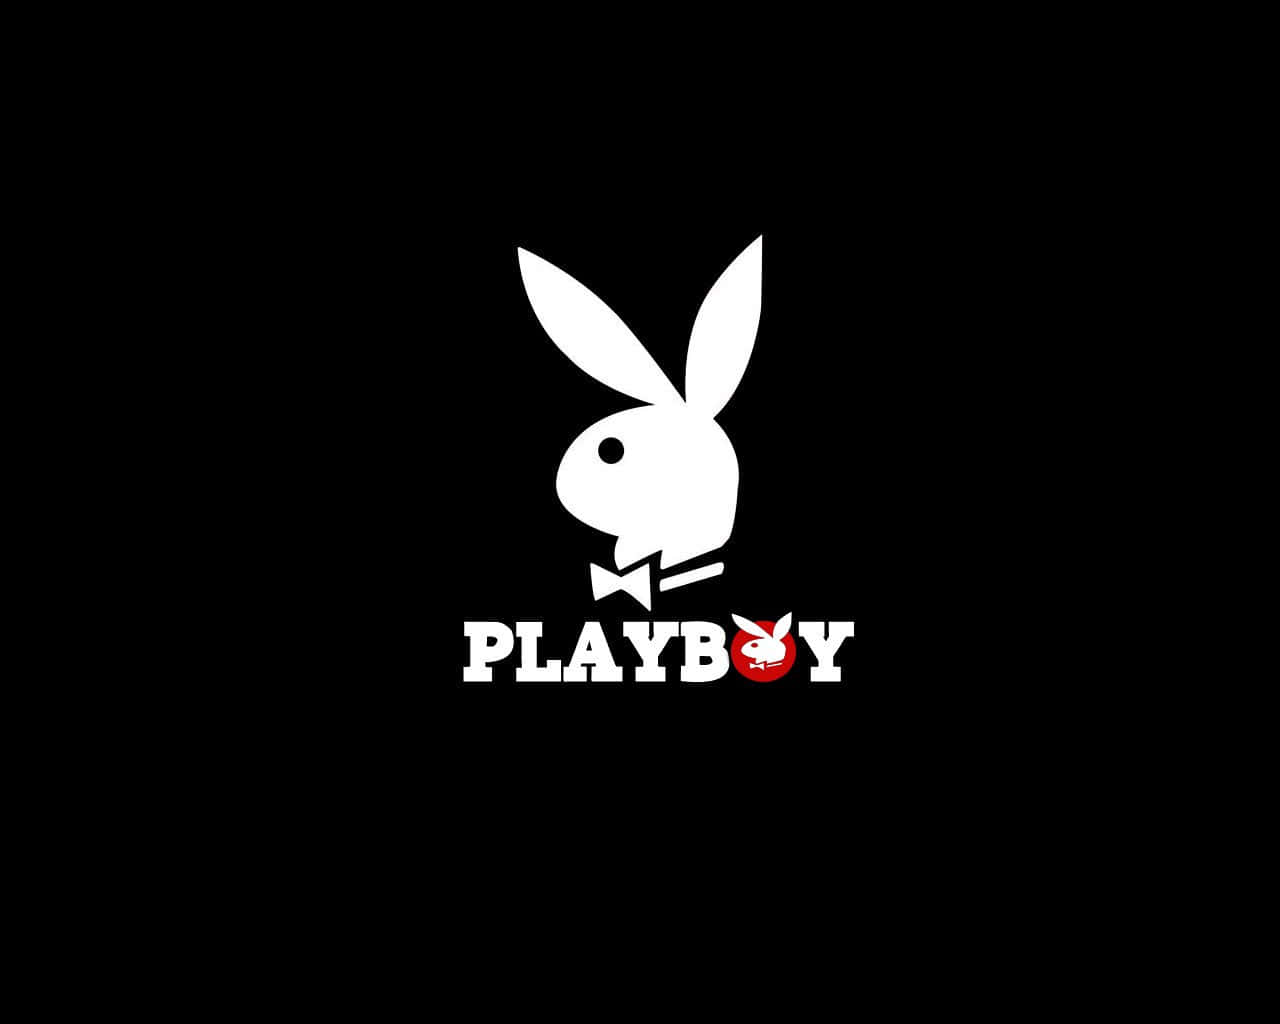 Live the Live of Playboy